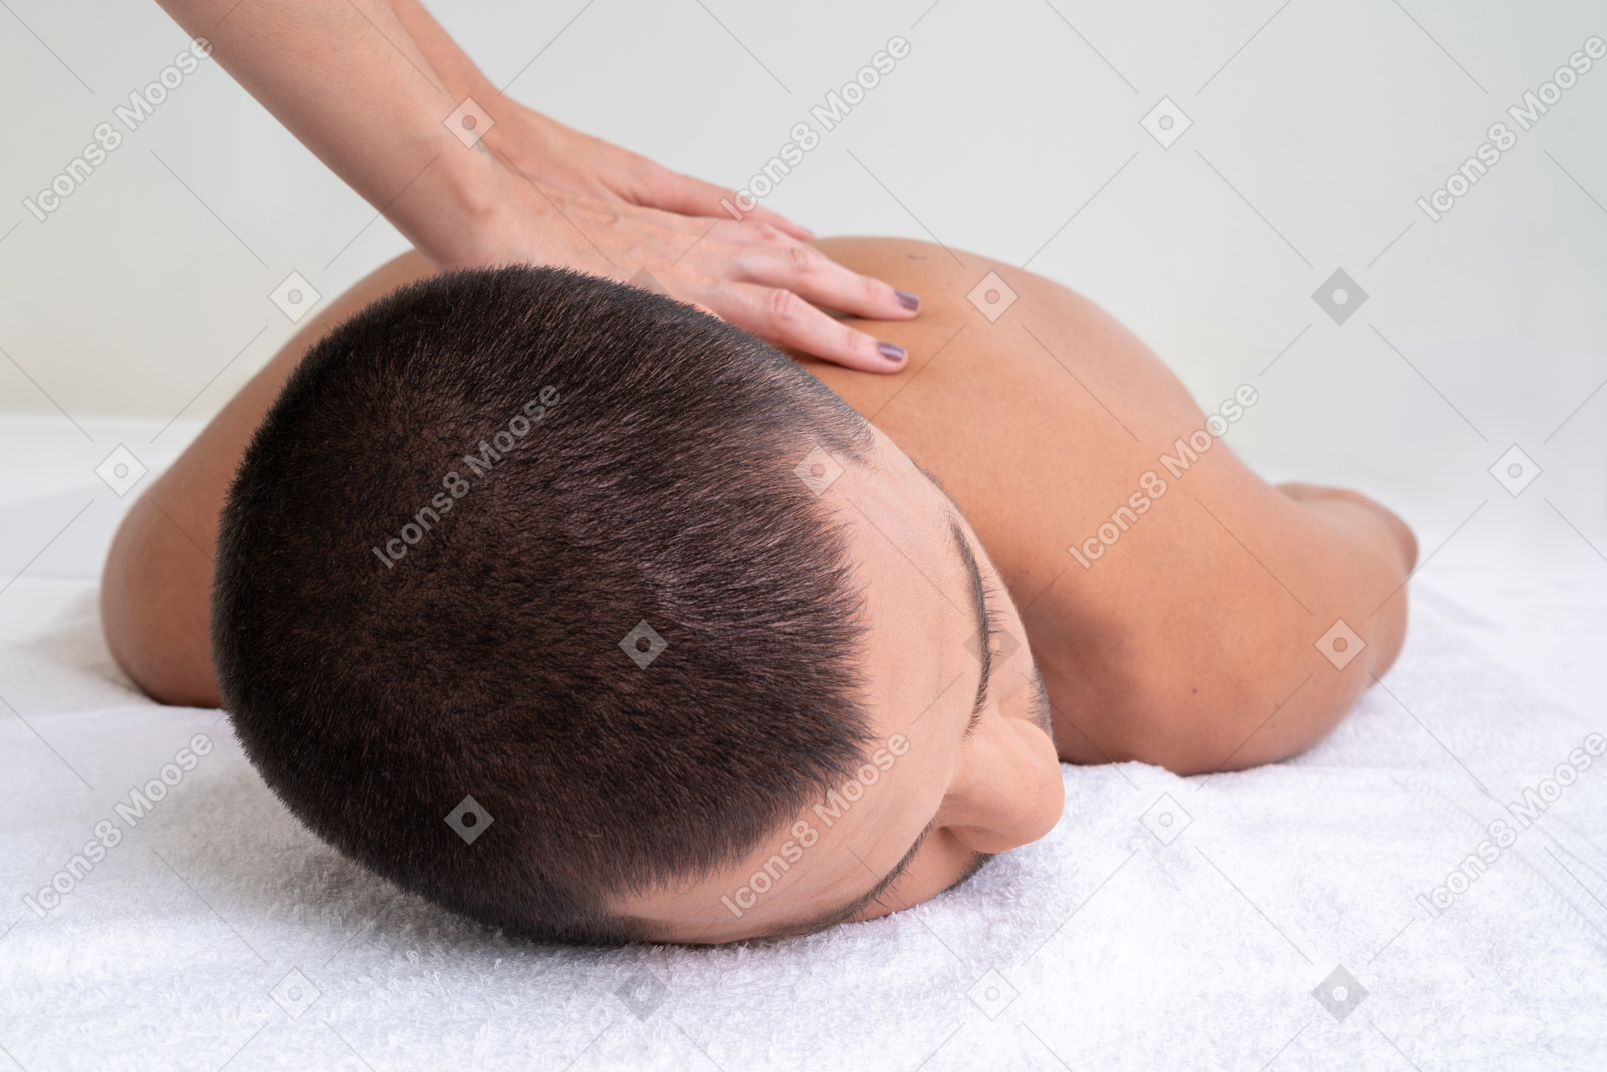 Could there be something better than massage?